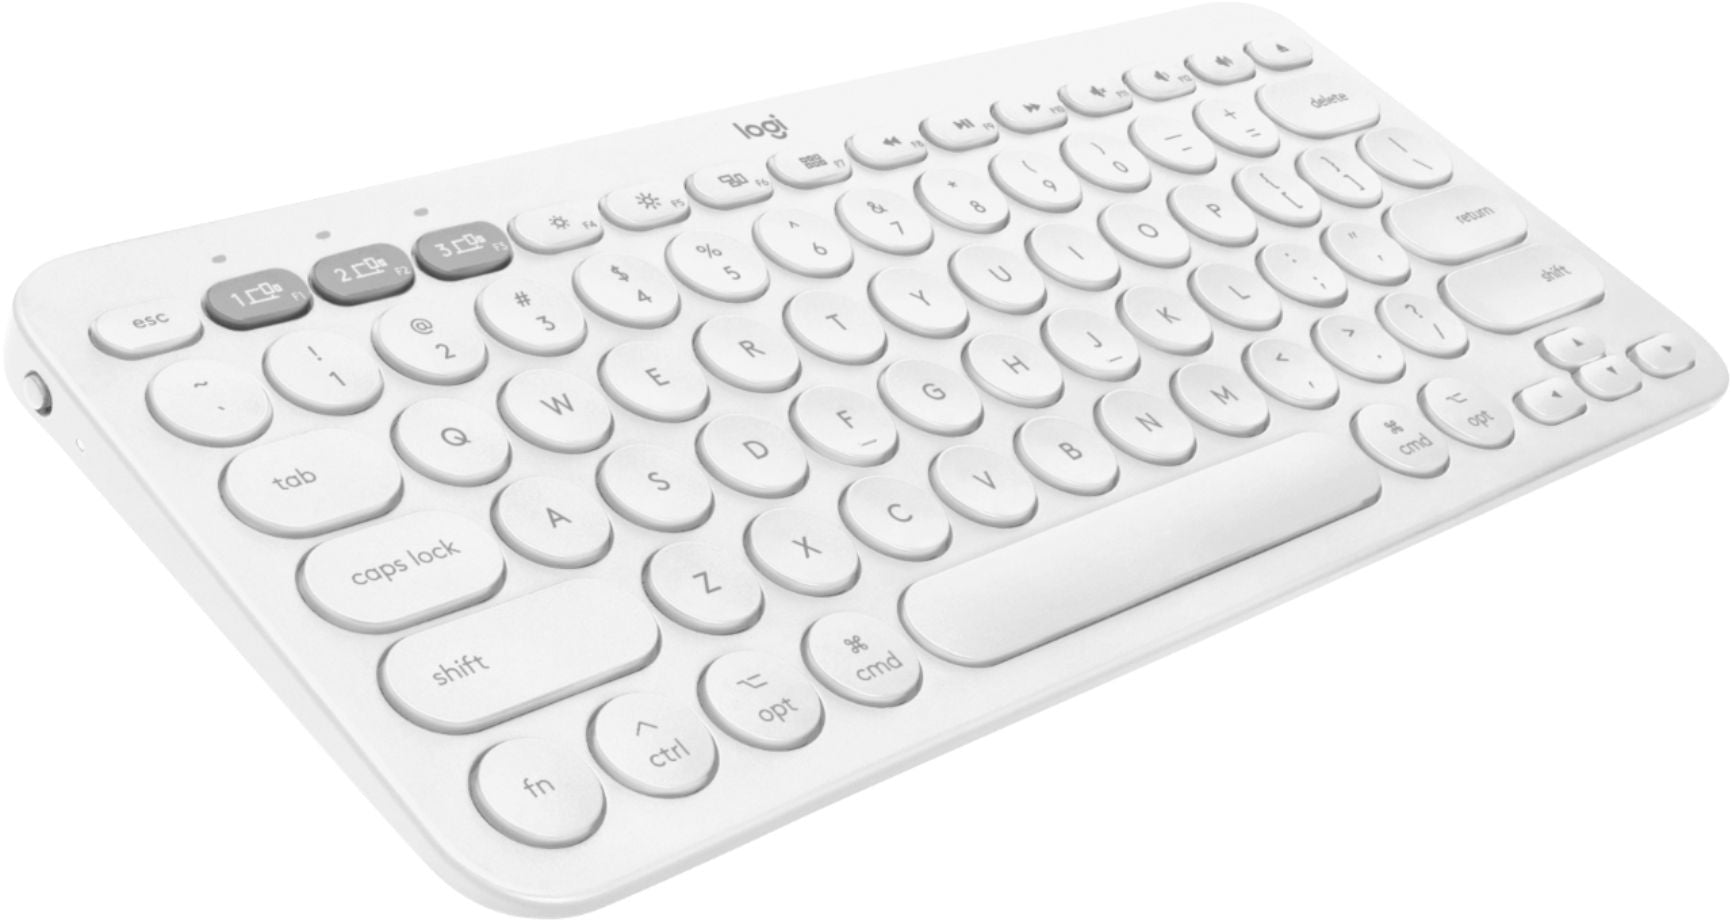 White Bluetooth Keyboard from Best Buy